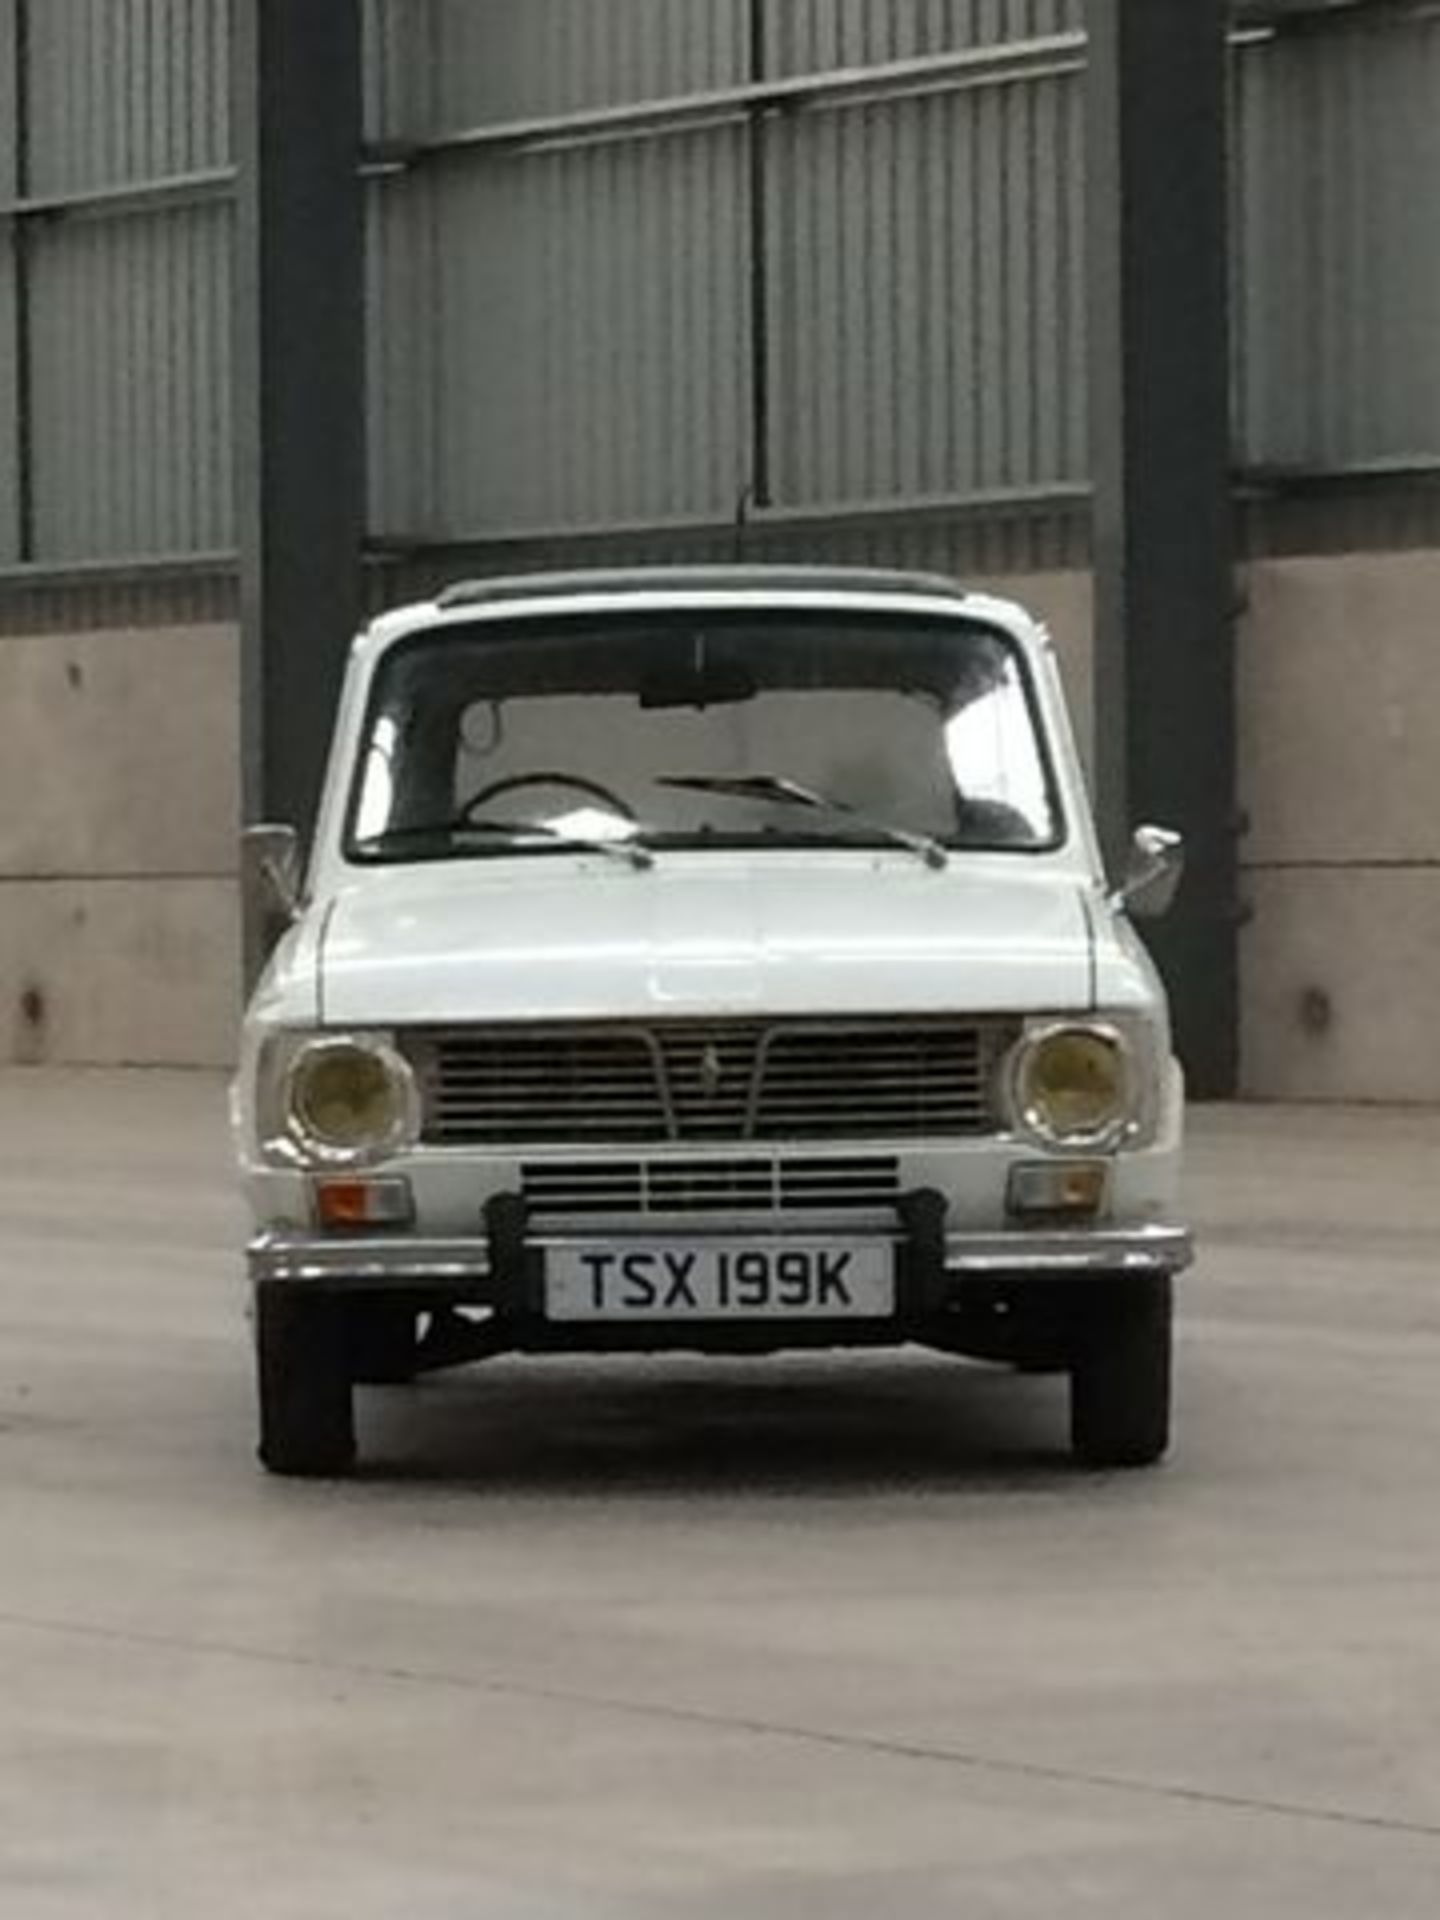 RENAULT 6 TL - 1108cc - Image 7 of 34